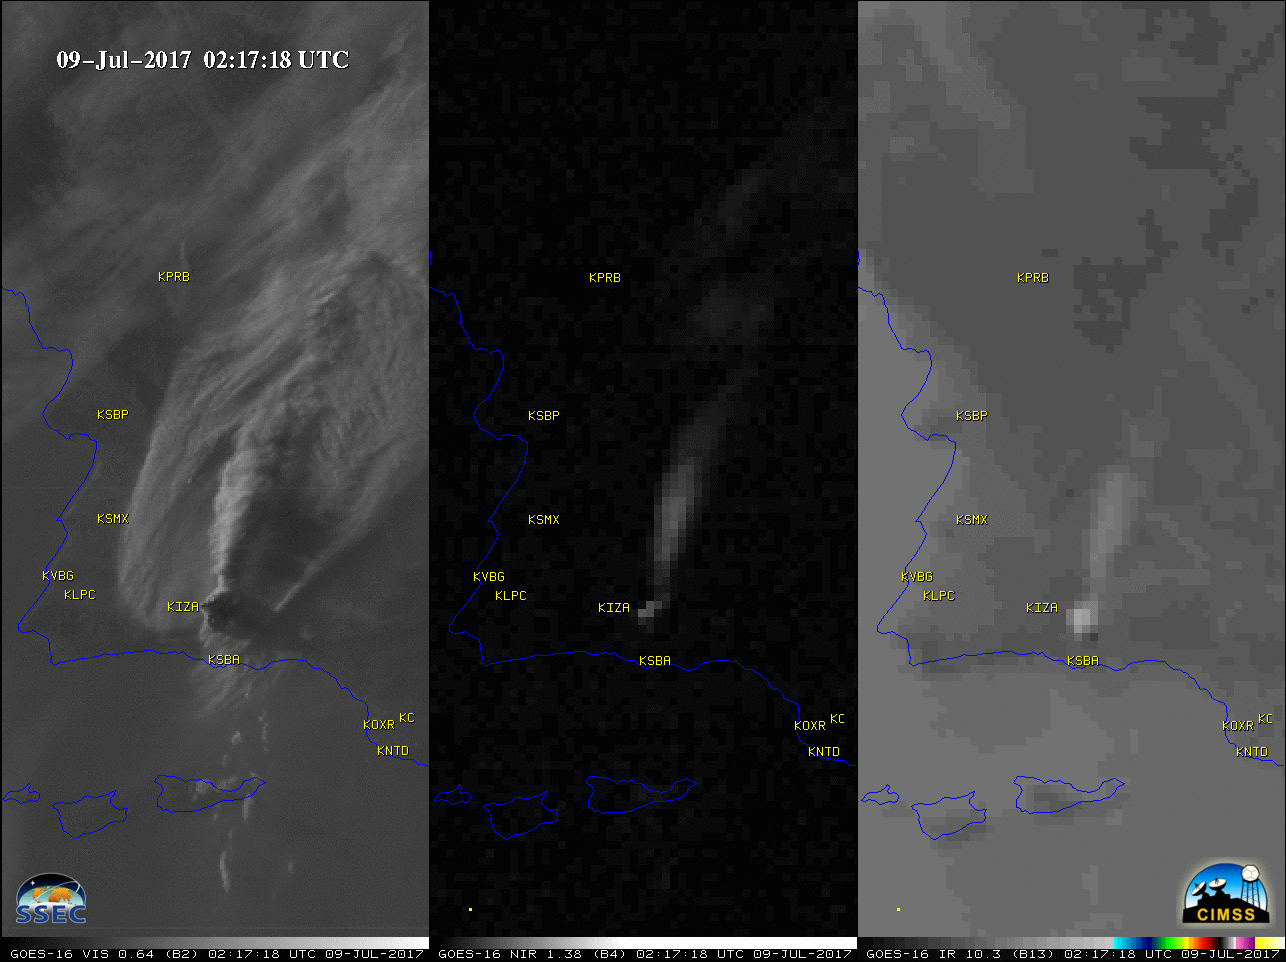 GOES-16 Visible (0.64 µm, left), Near-Infrared Cirrus (1.38 µm, center) and Infrared Window (10.3 µm, right) images, with station identifiers plotted in yellow [click to play MP4 animation]